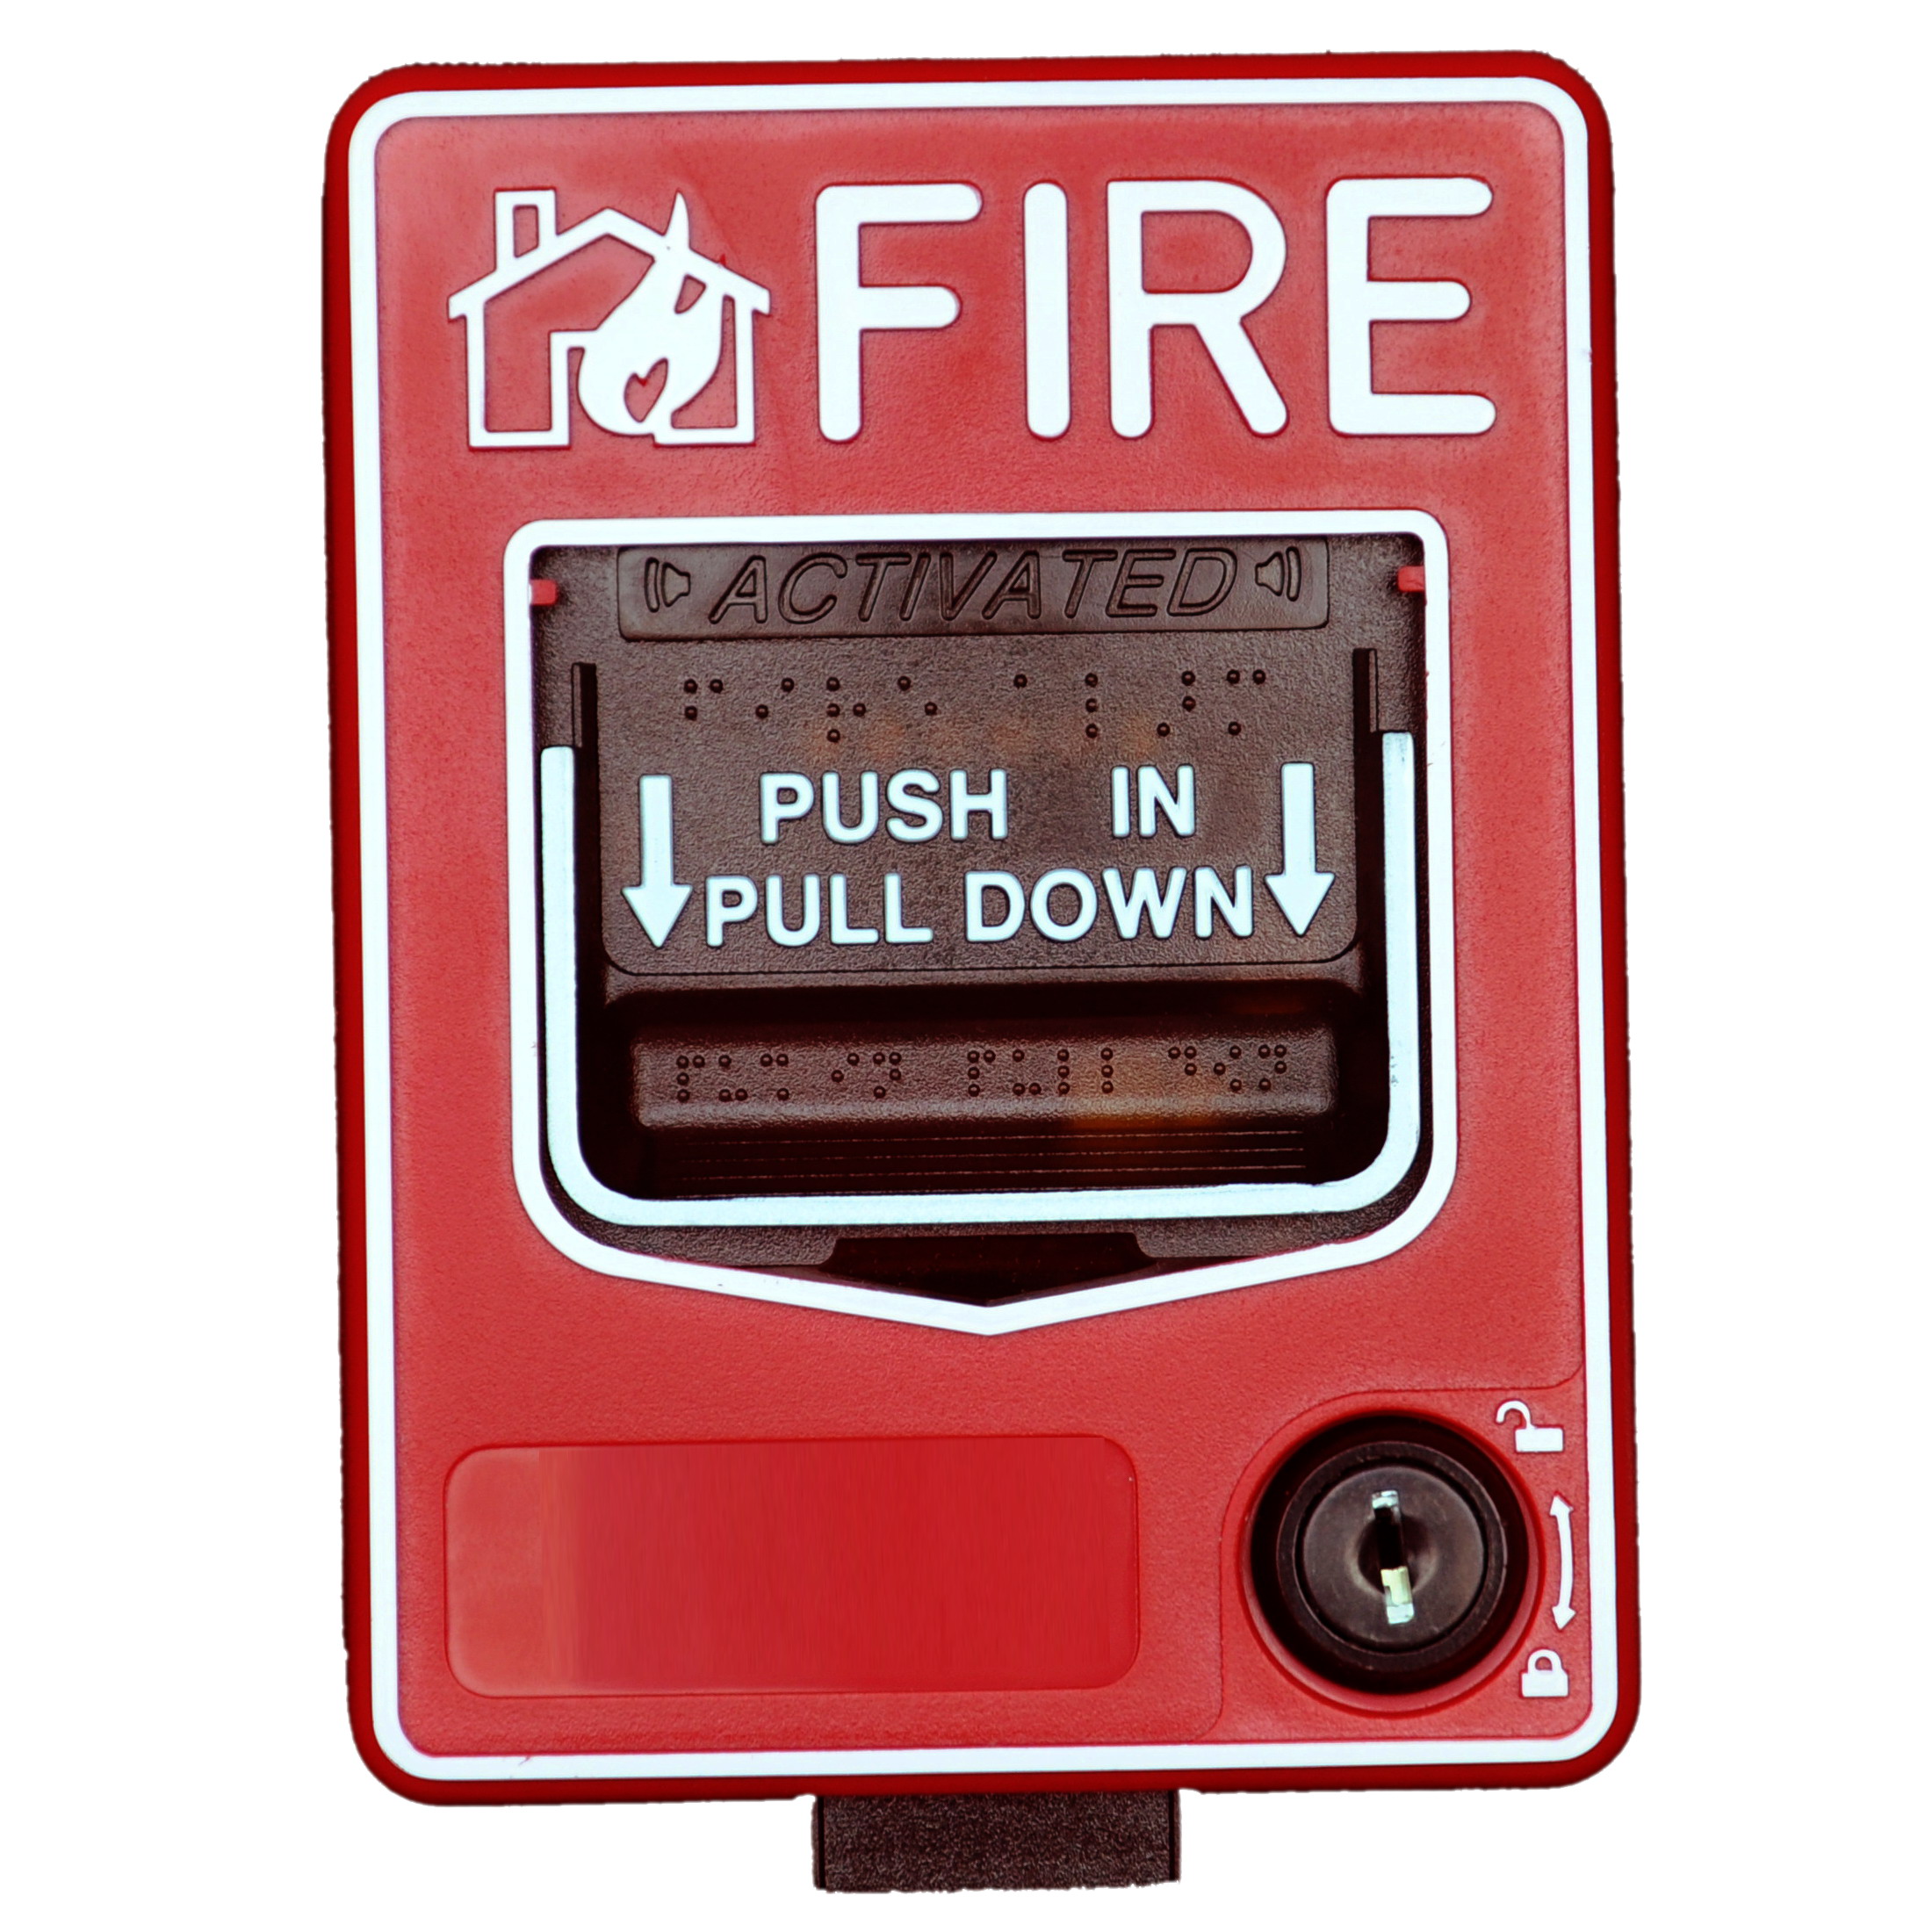 Fire emergency call switch